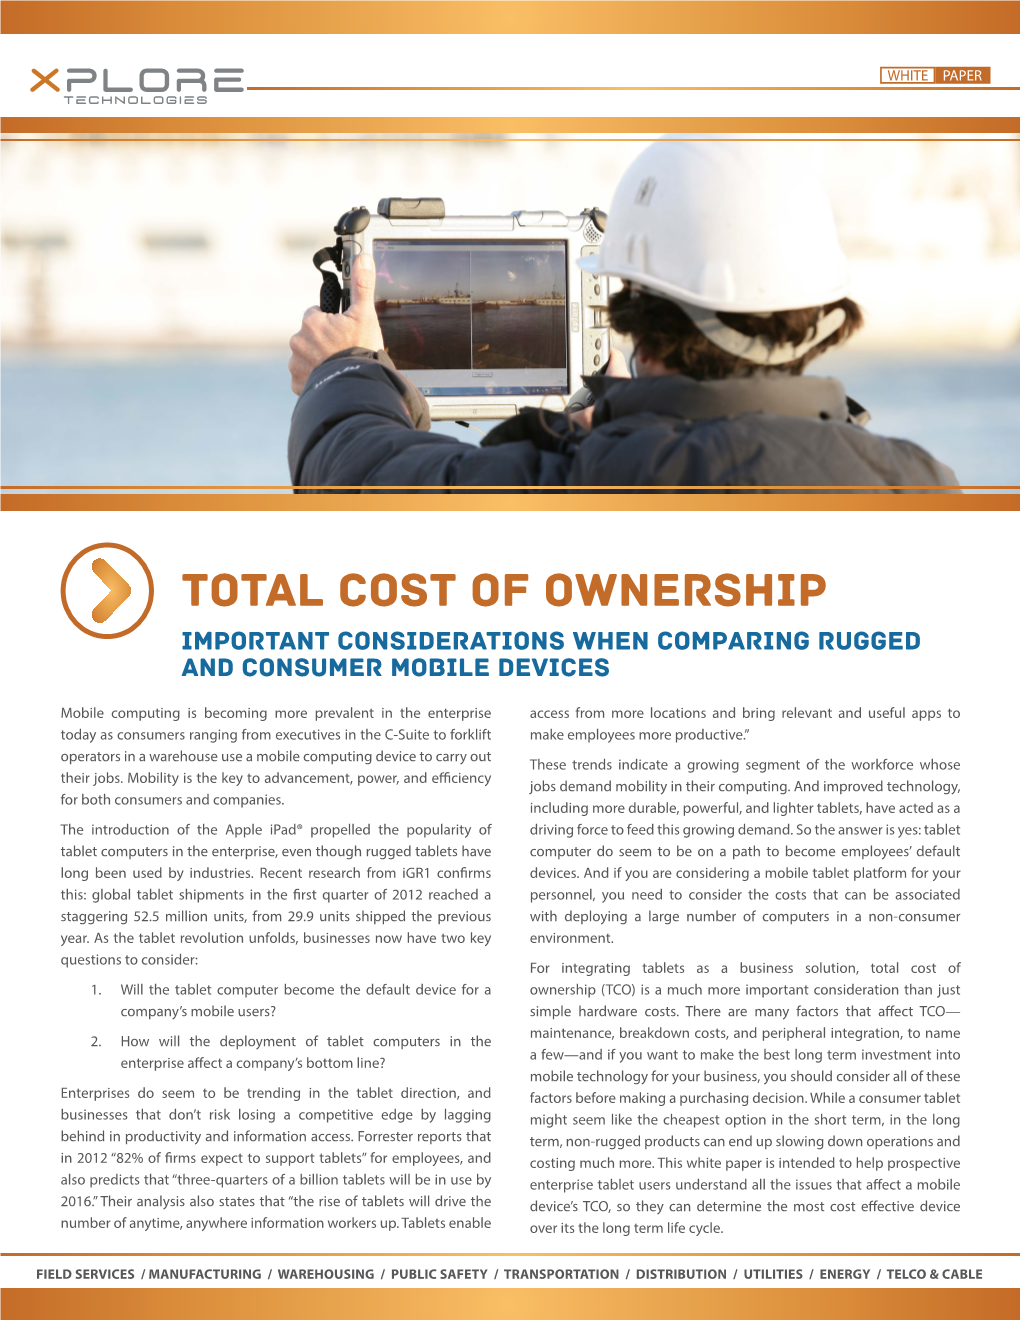 Total Cost of Ownership Important Considerations When Comparing Rugged and Consumer Mobile Devices